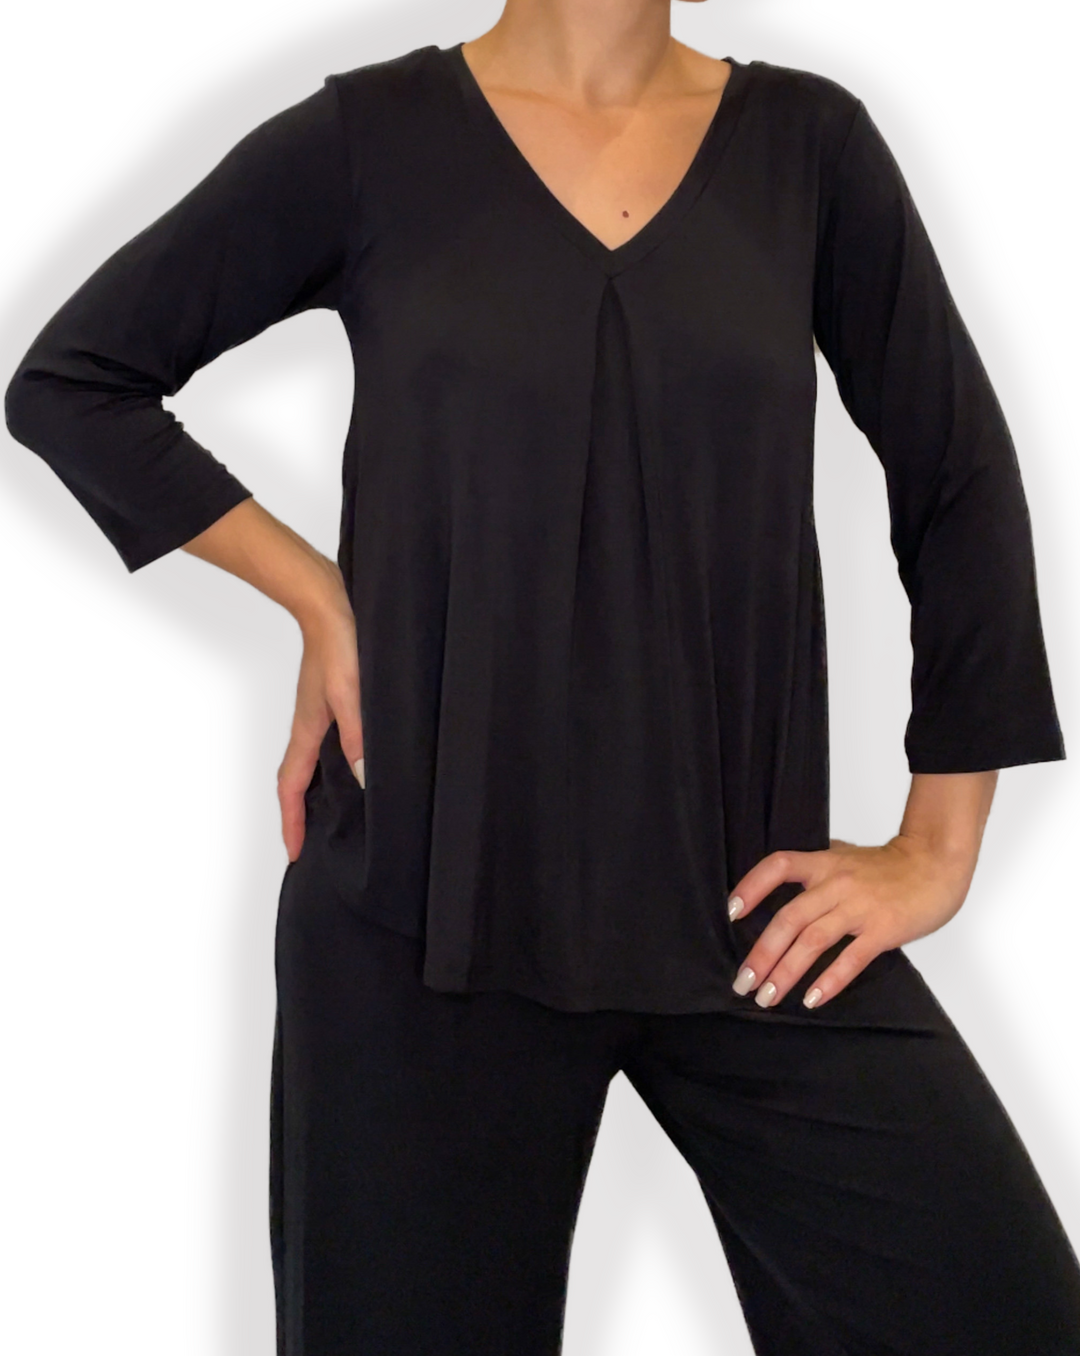 EILEEN Braless Bamboo 3/4 Sleeve Top with center inverted pleat design in black color